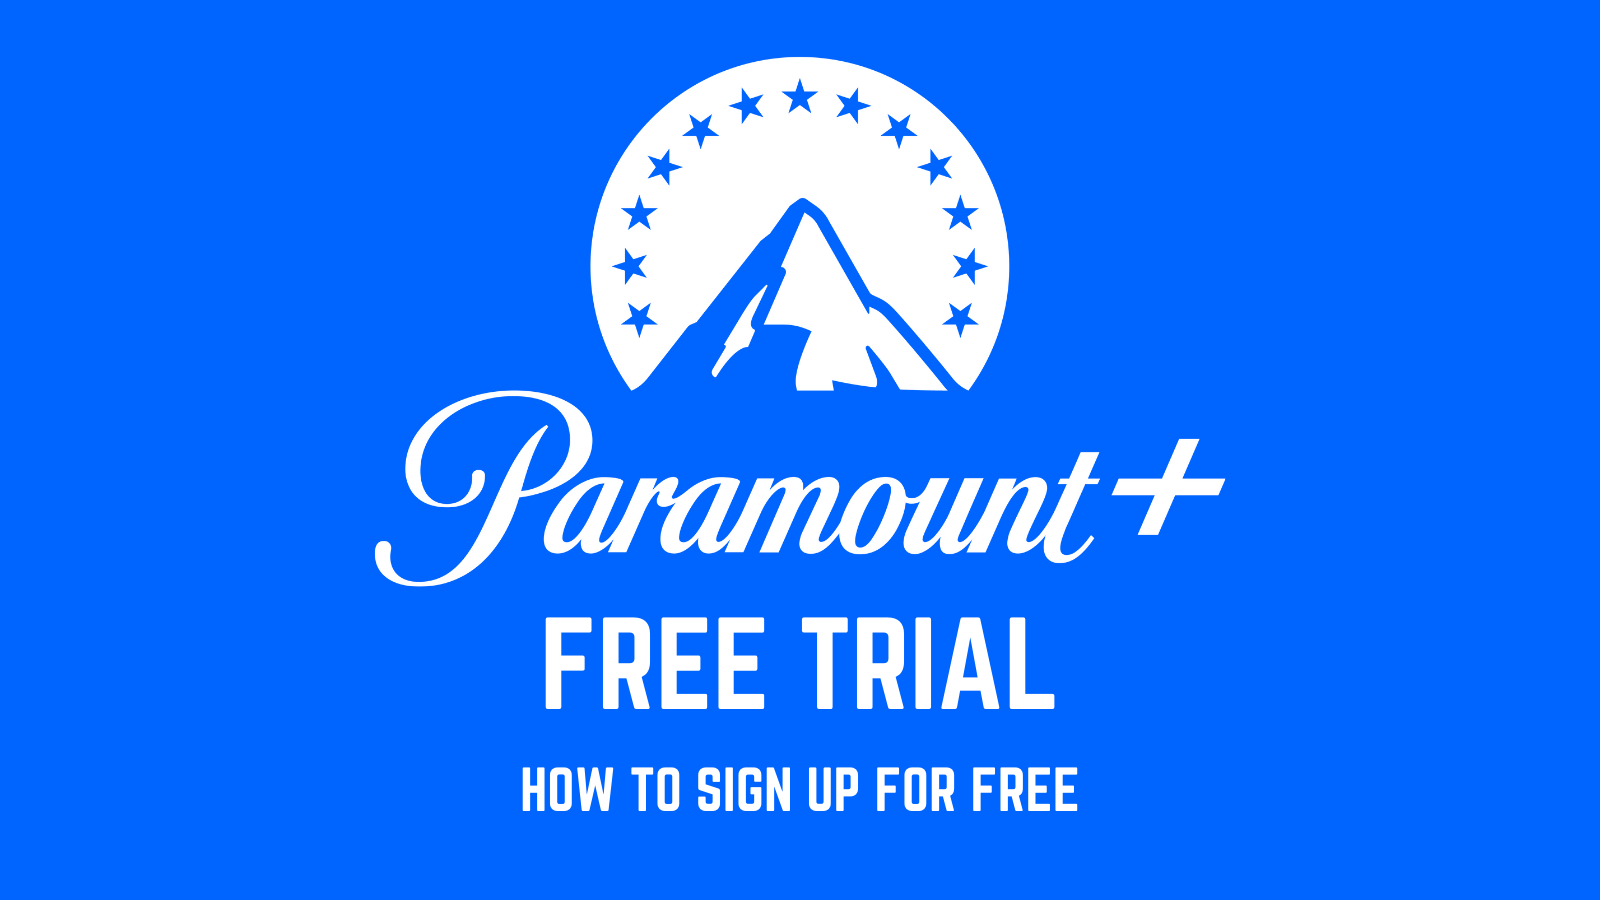 How to get Paramount Plus Free Trial in 2022